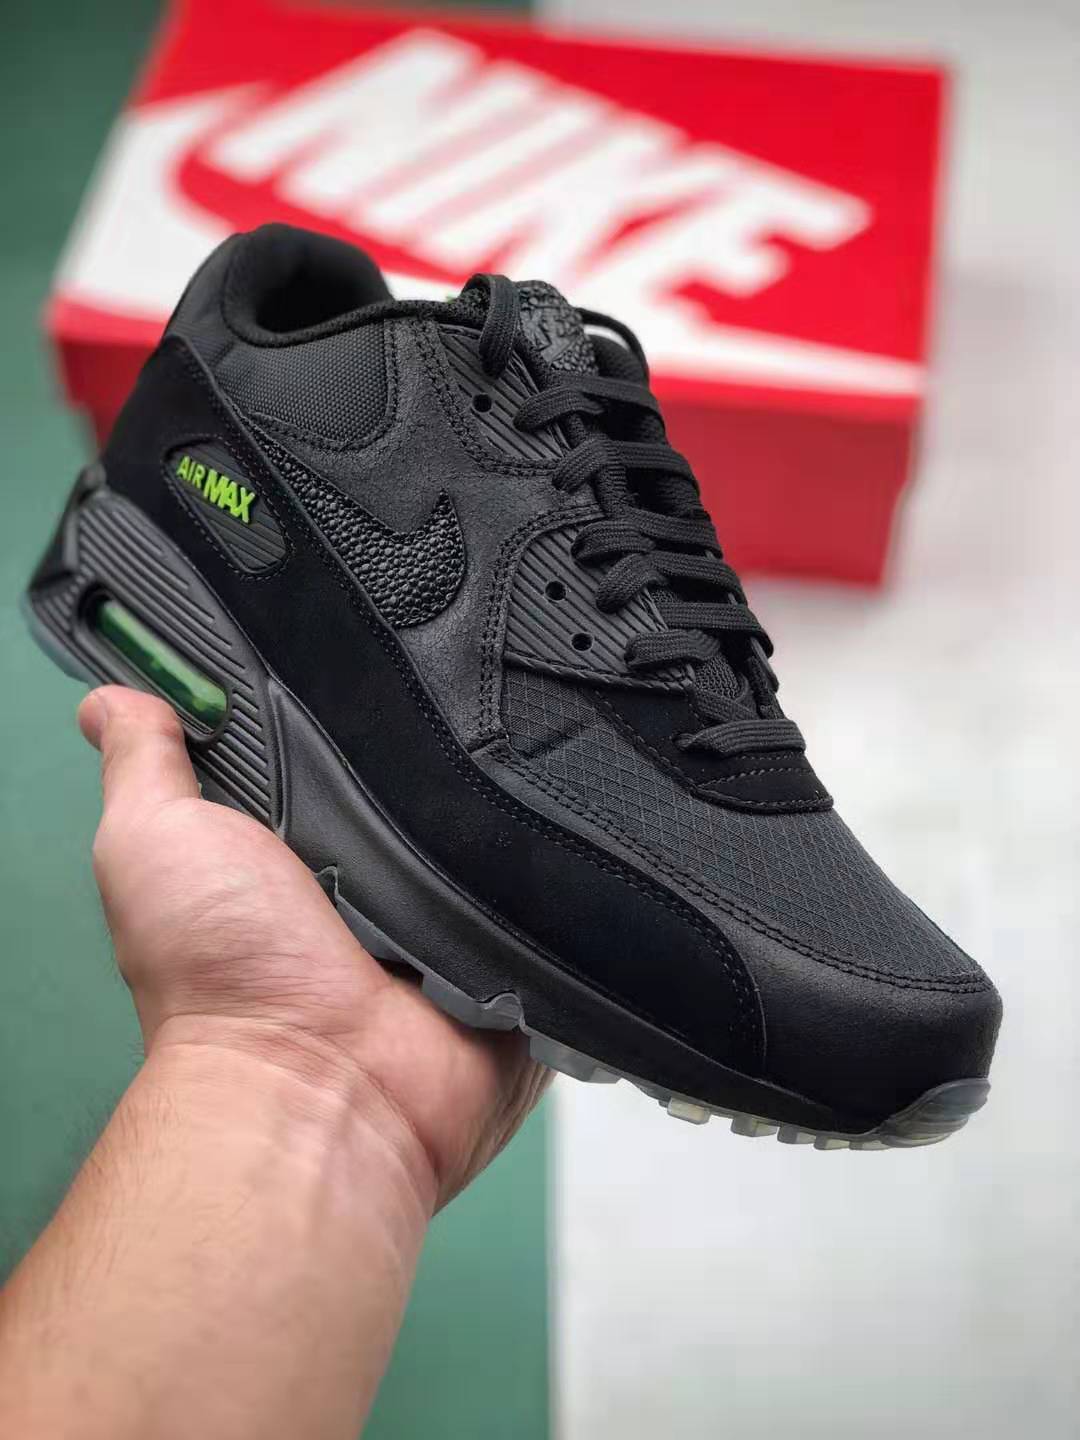 Nike Air Max 90 'Night Ops' AQ6101-001 - Stealthy Style for the Modern Ninja